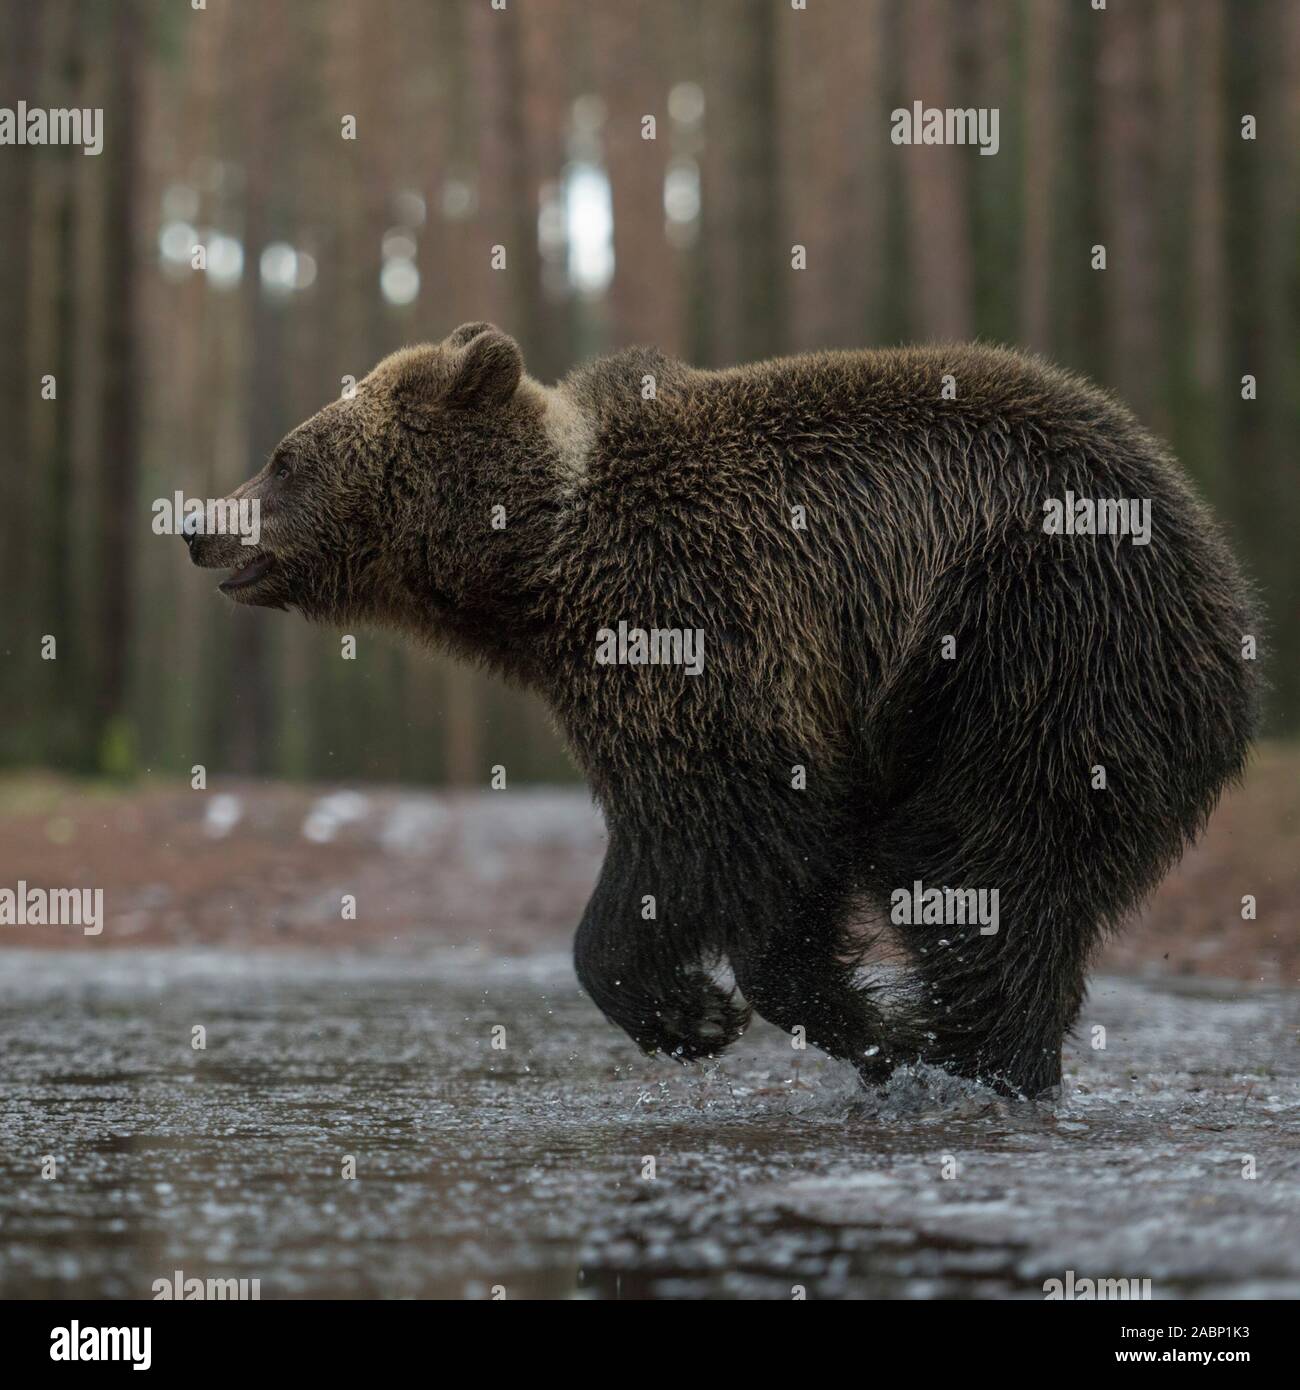 Eurasian Brown Bear / Braunbaer ( Ursus arctos ), young, in a hurry, runs fast through a frozen puddle, crossing a forest road, in winter, cute and fu Stock Photo